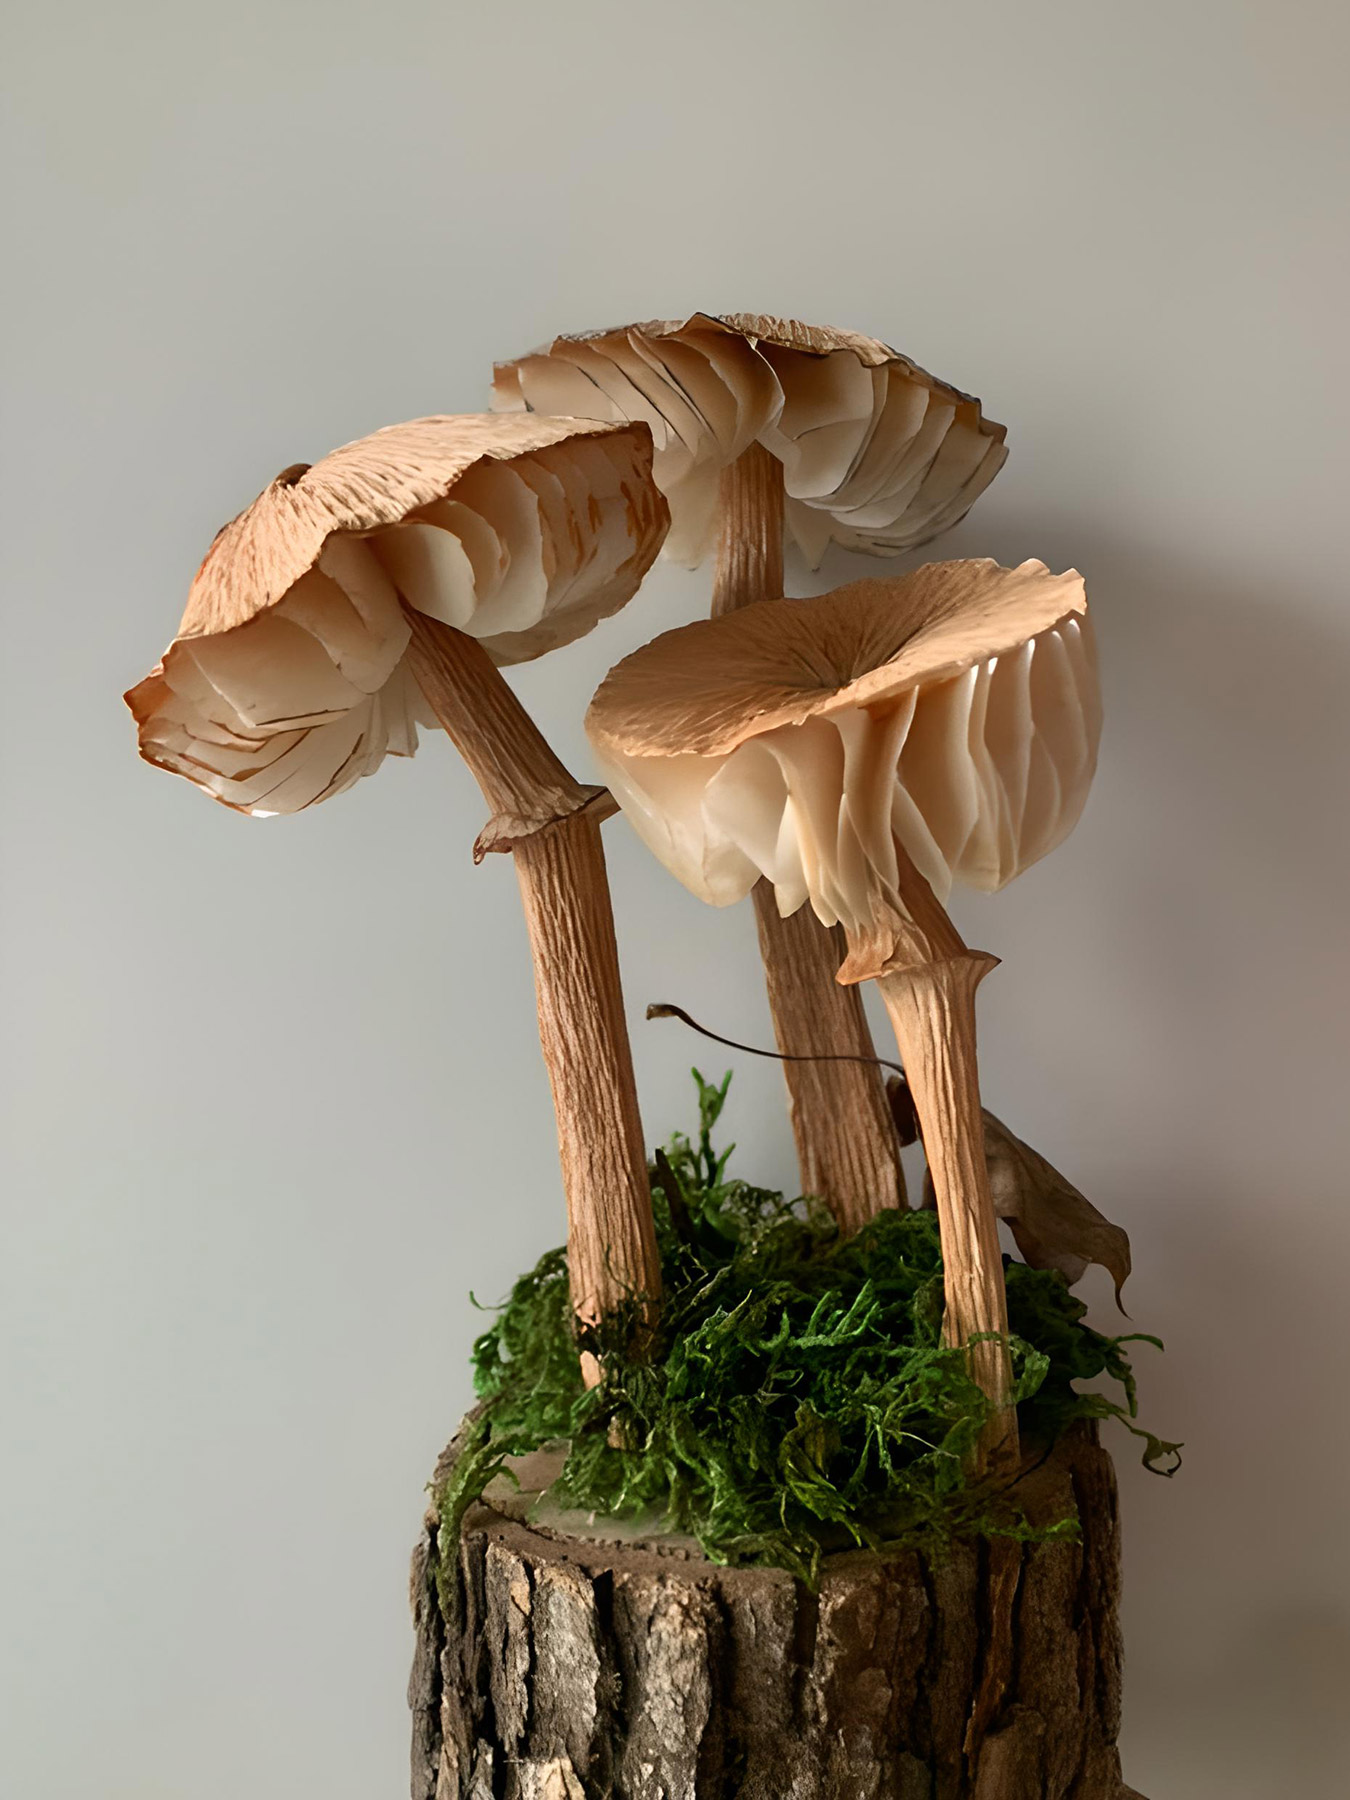 Three tan-colored paper mushrooms arranged together on a log with paper moss against a white background